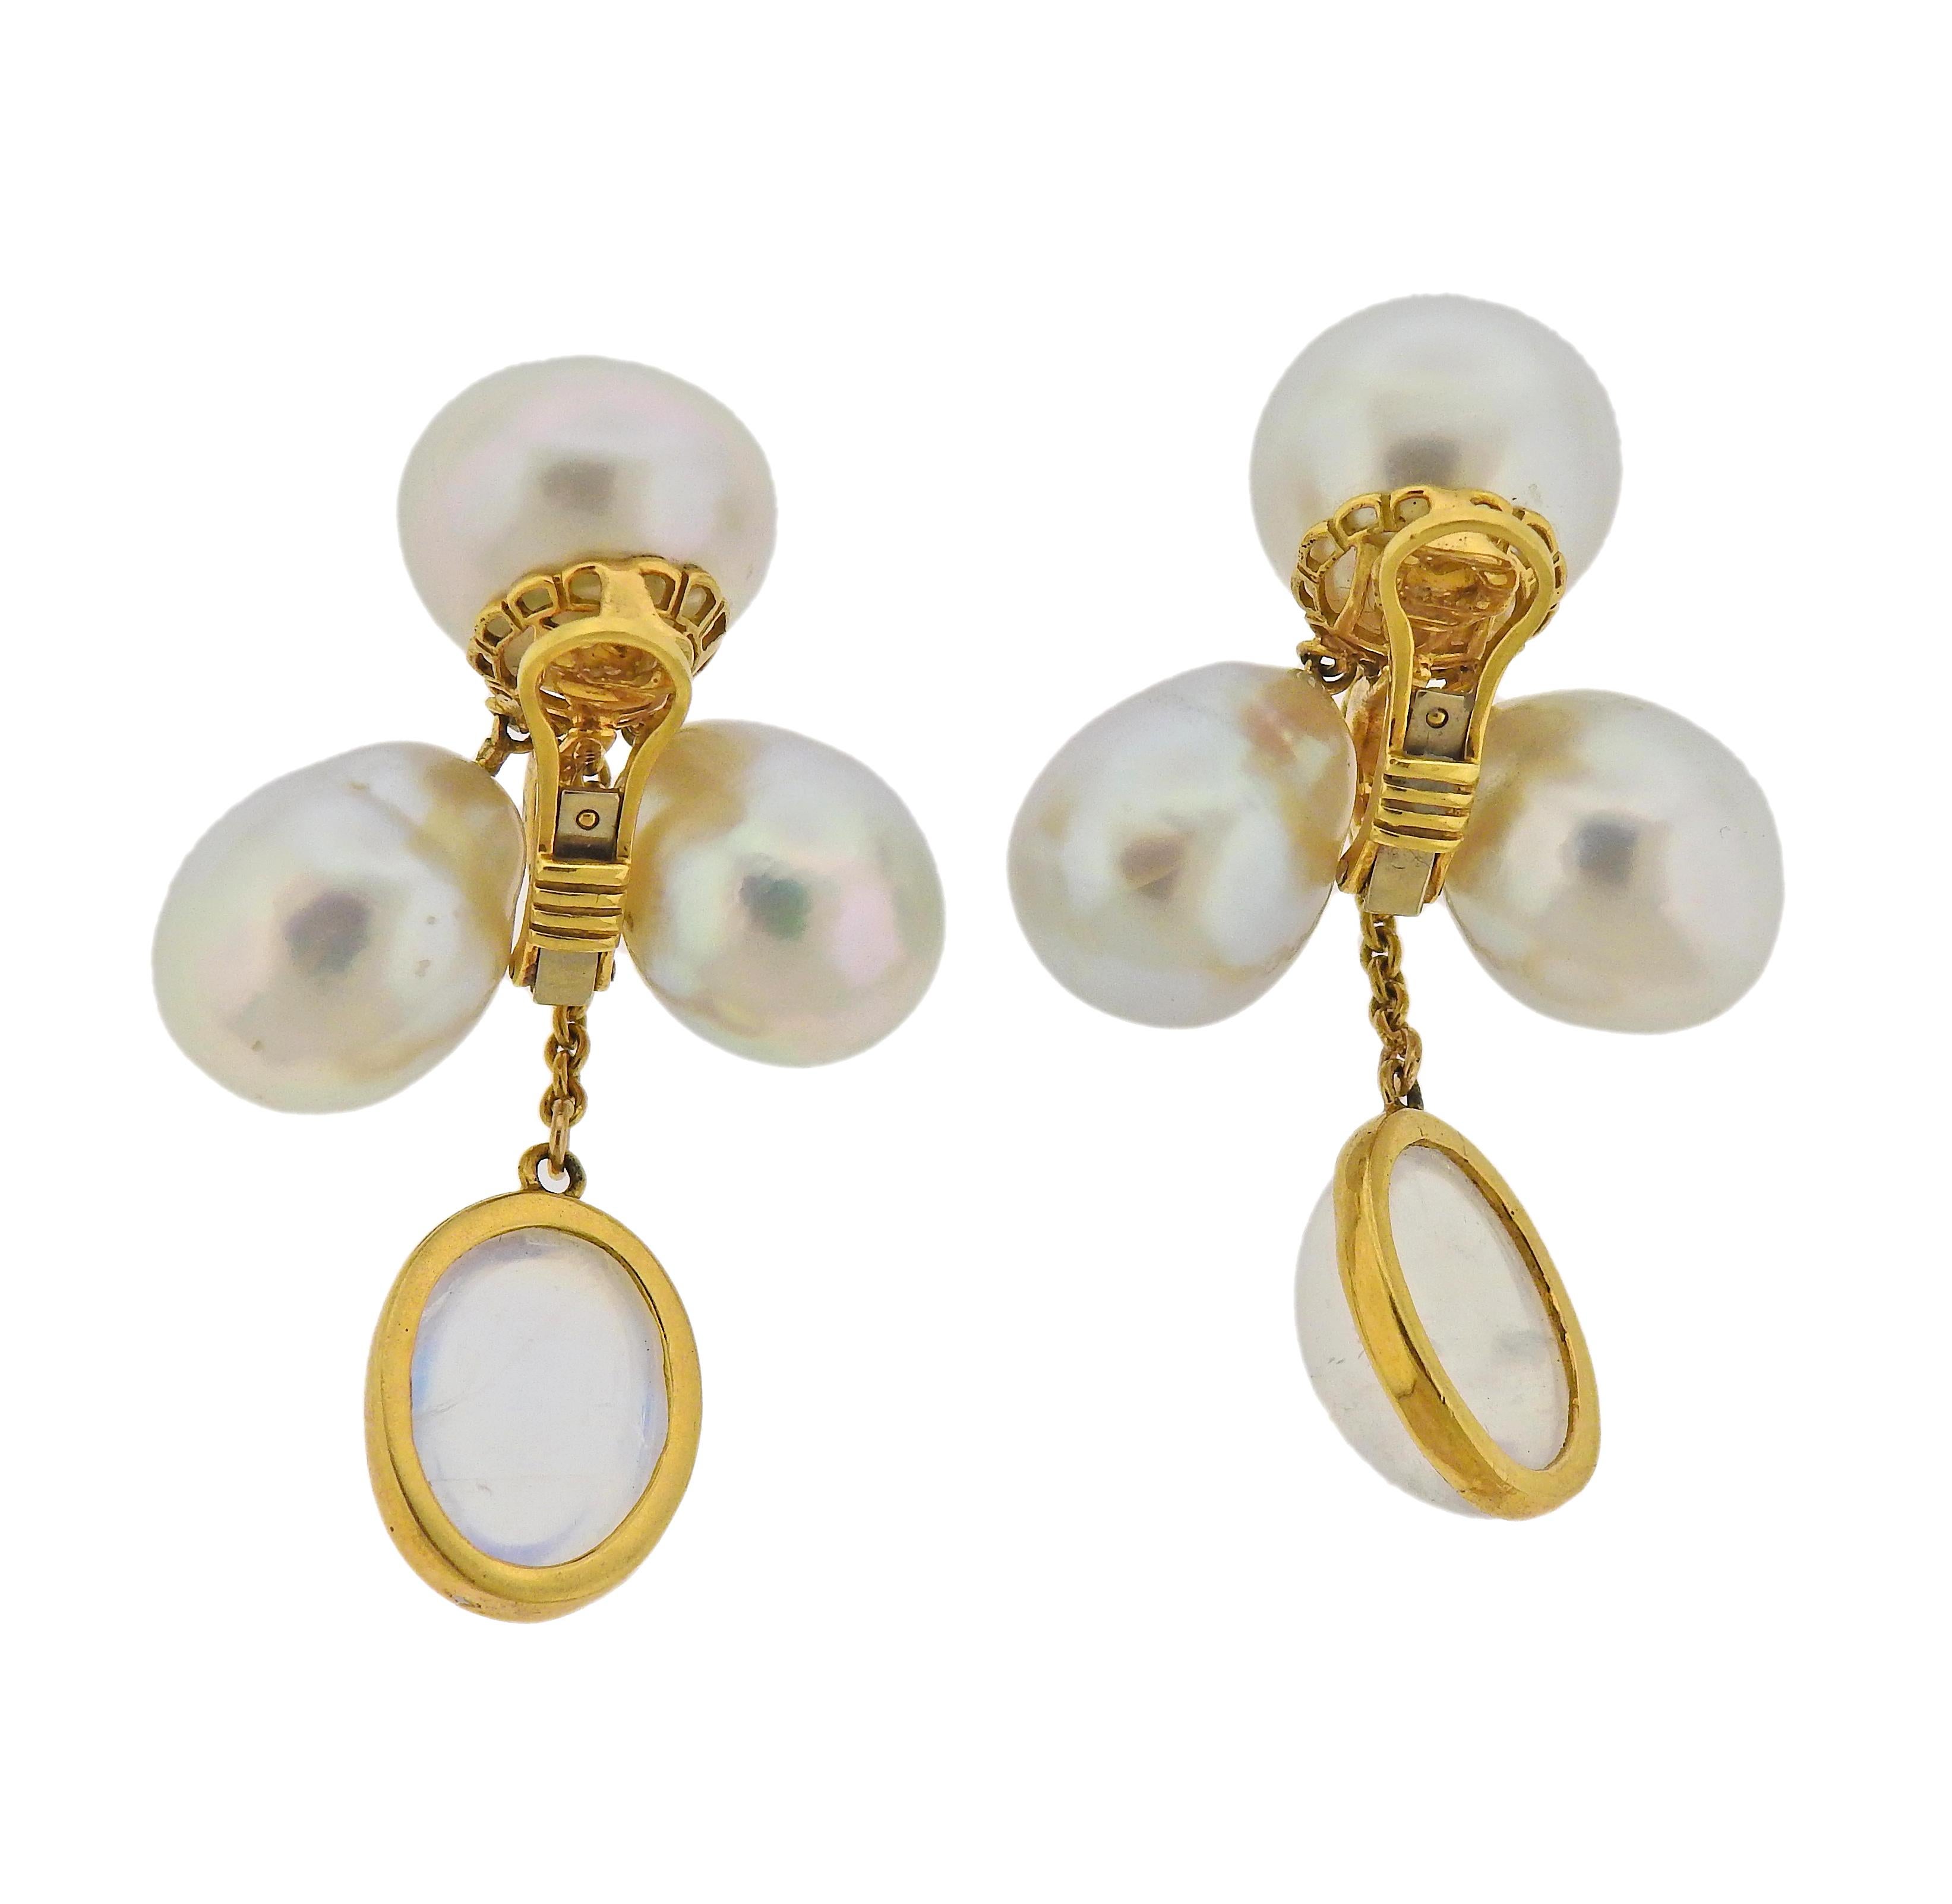 Pair of 18k  gold earrings with 12.1-15.3mm South Sea pearls and approx. 17.03ctw moonstones, crafted by Assael for Prince Dimitri. Retail $7300. Earrings are 49mm long x 26mm wide. Weight - 28.9 grams. Marked: 750.